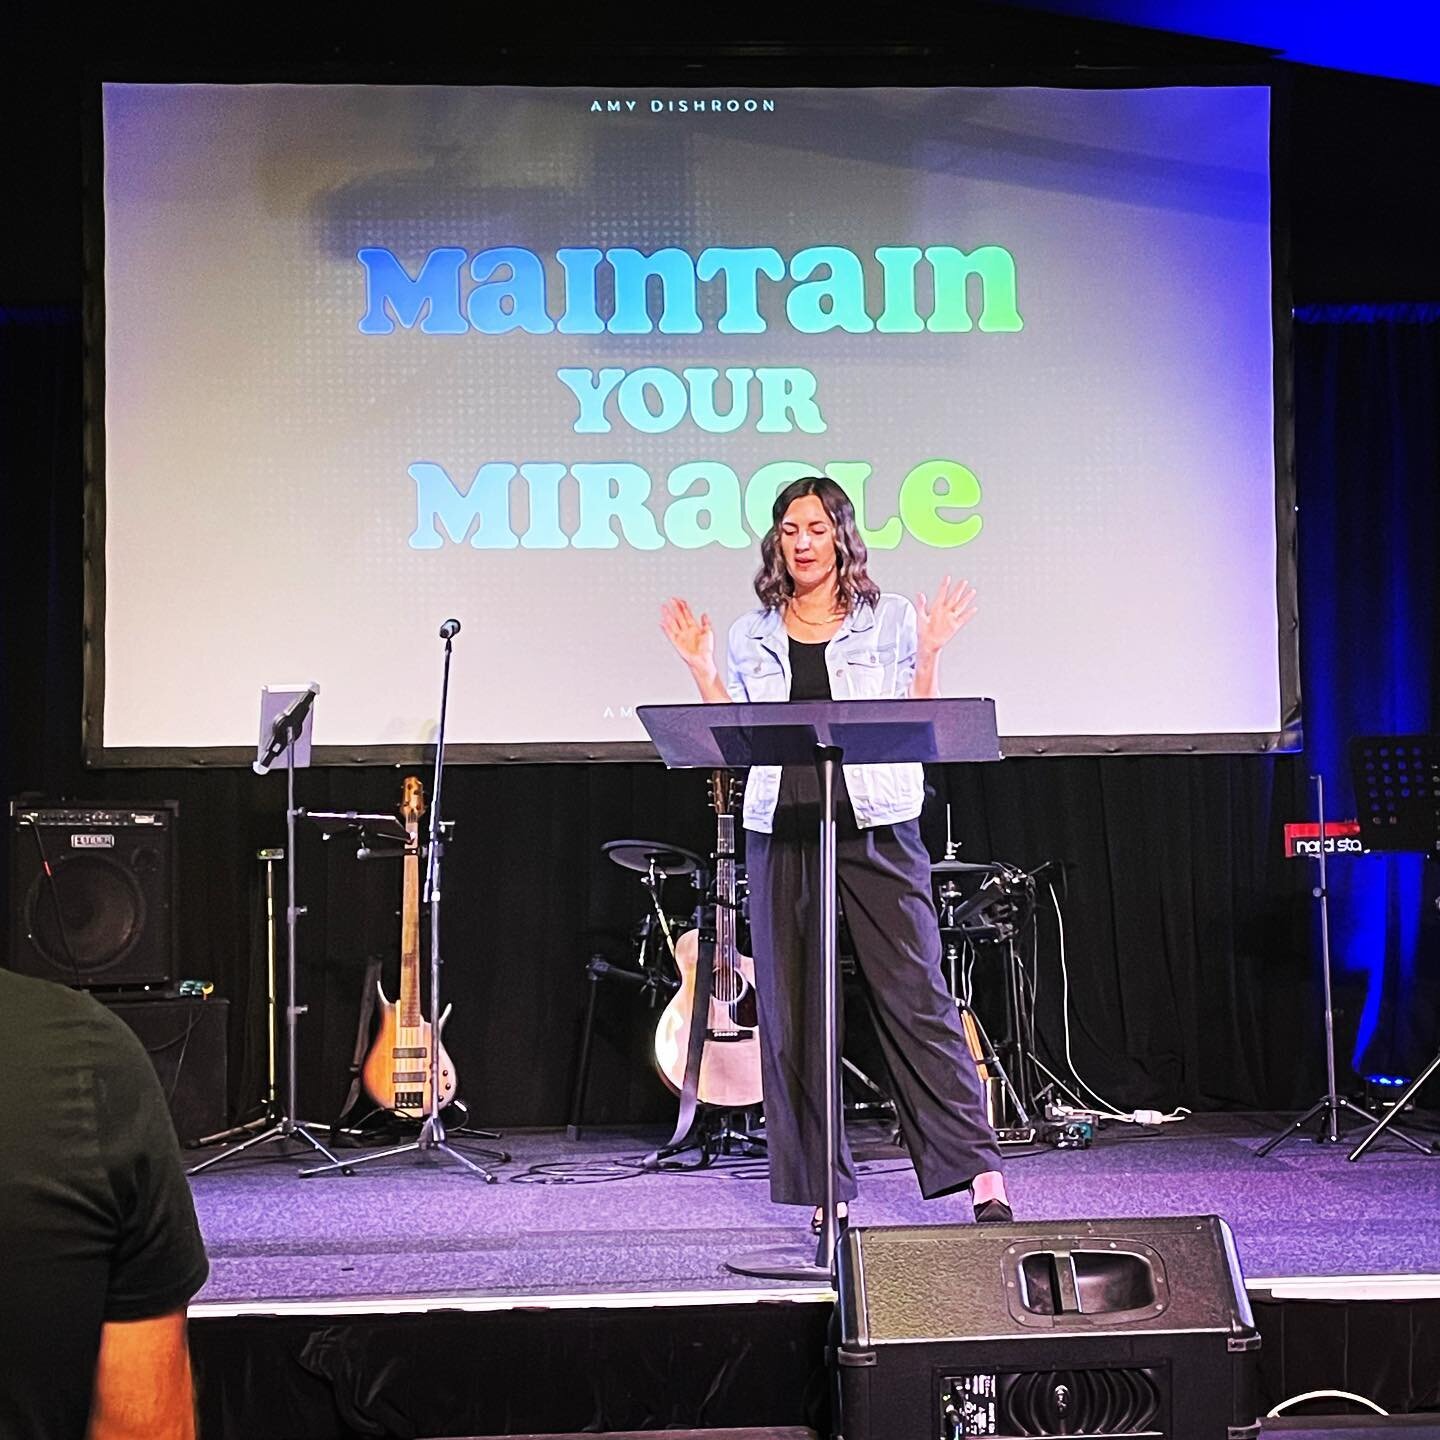 Amy preaching an amazing message this morning about Maintaining Your Miracle. Jump online now https://www.youtube.com/live/ynII_KZYb98?feature=share